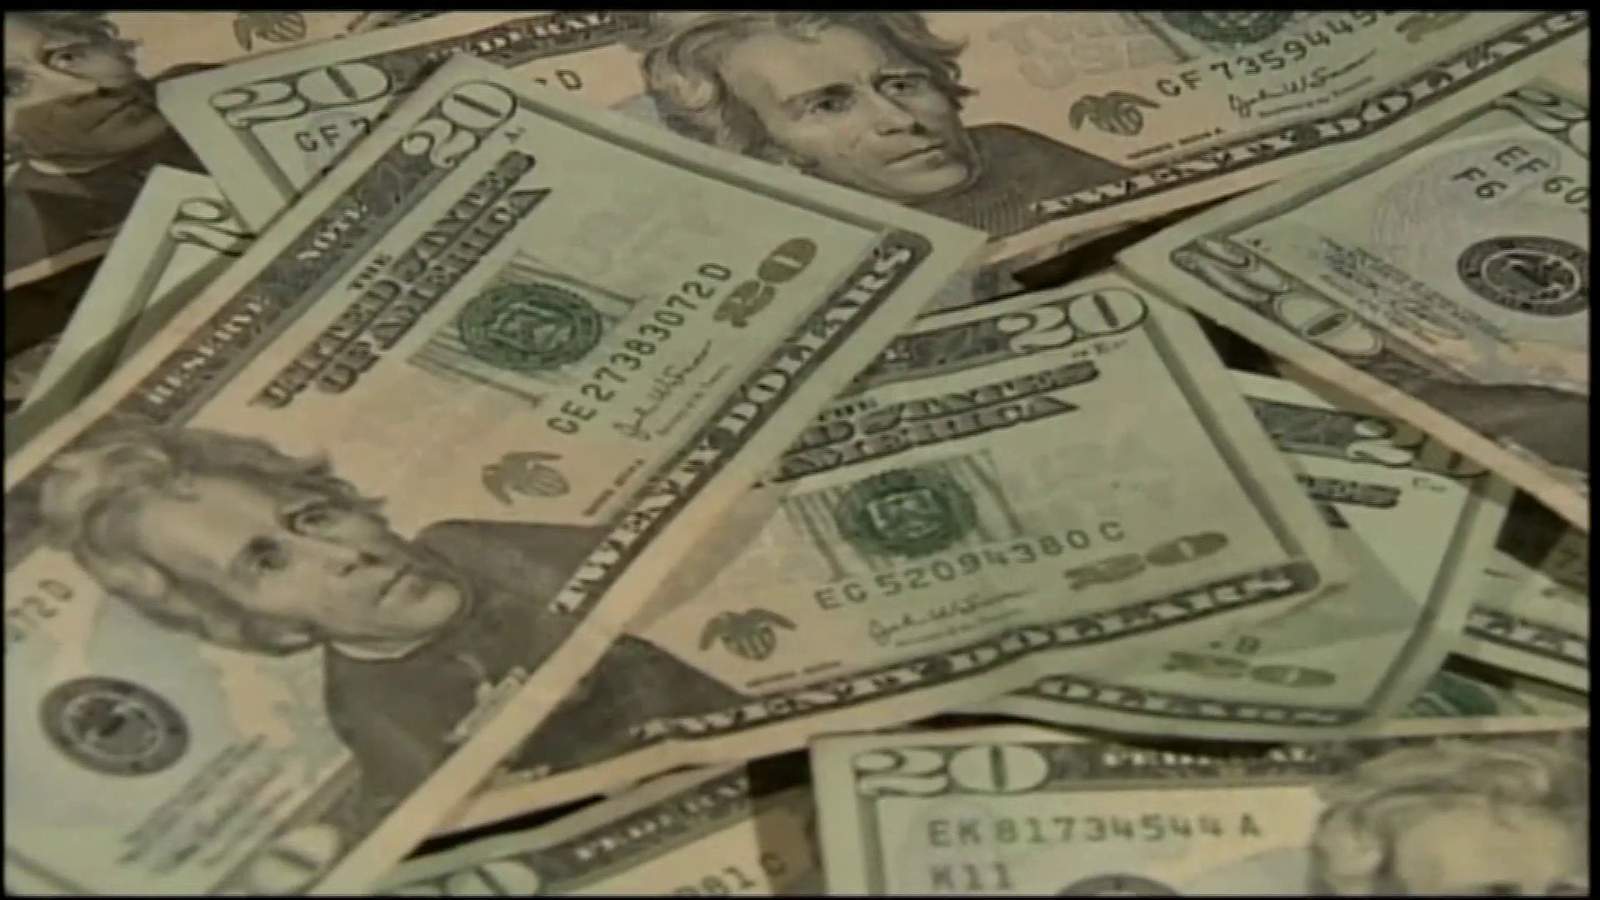 Minimum wage hike all but dead in big COVID relief bill that includes $1,400 direct payments